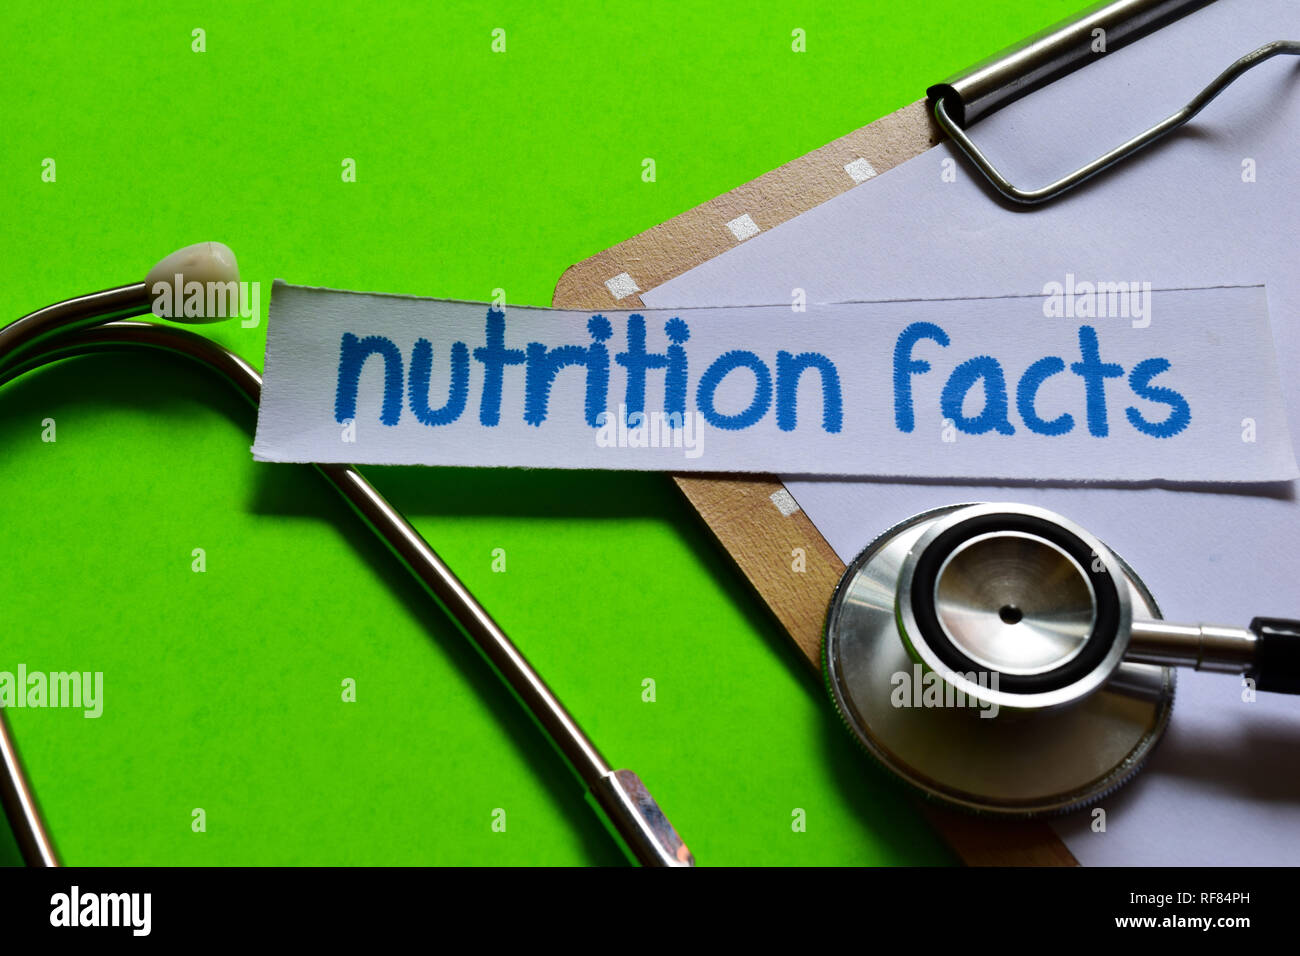 Nutrition facts on healthcare concept inspiration with green background Stock Photo